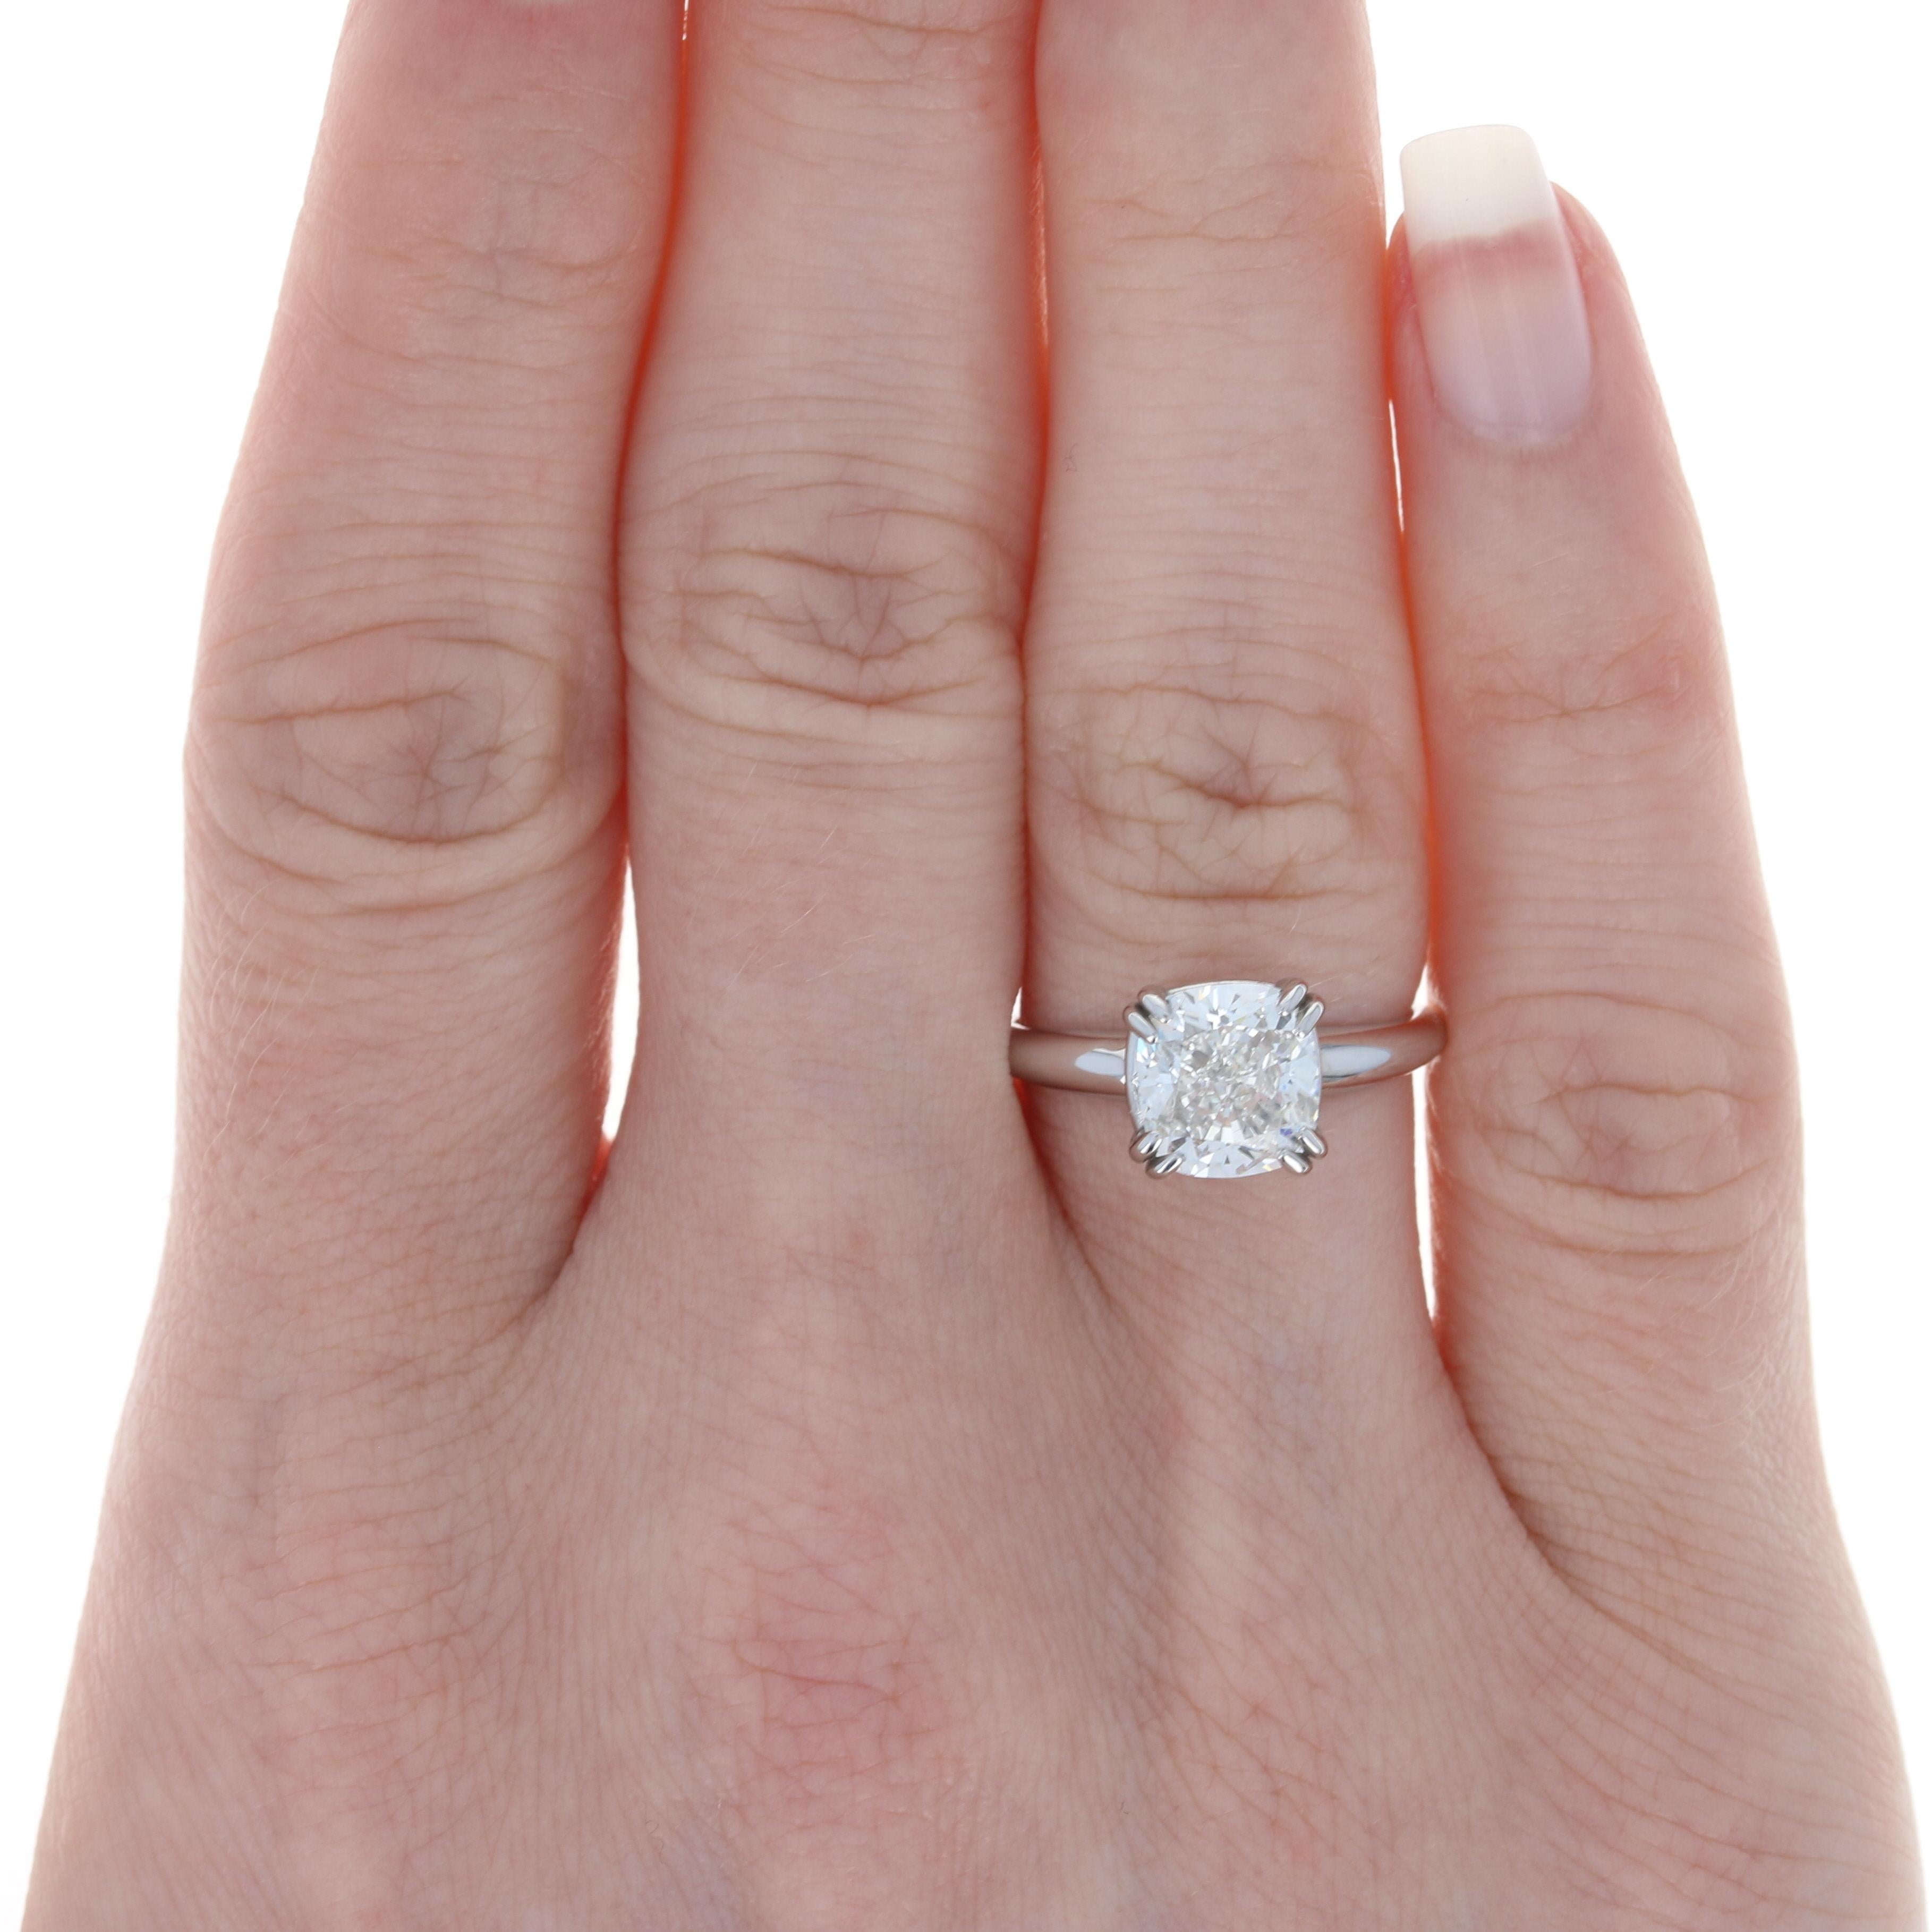 Size: 5 3/4 
Sizing Fee: Up or Down 2 sizes for $30 

Metal Content: 14k White Gold

Stone Information: 
Natural Diamond
Carat: 2.52ct
Cut: Cushion
Color: G
Clarity: VS1
Size (mm): 7.86 x 7.29 x 5.17 

Solitaire's GIA Report Number: